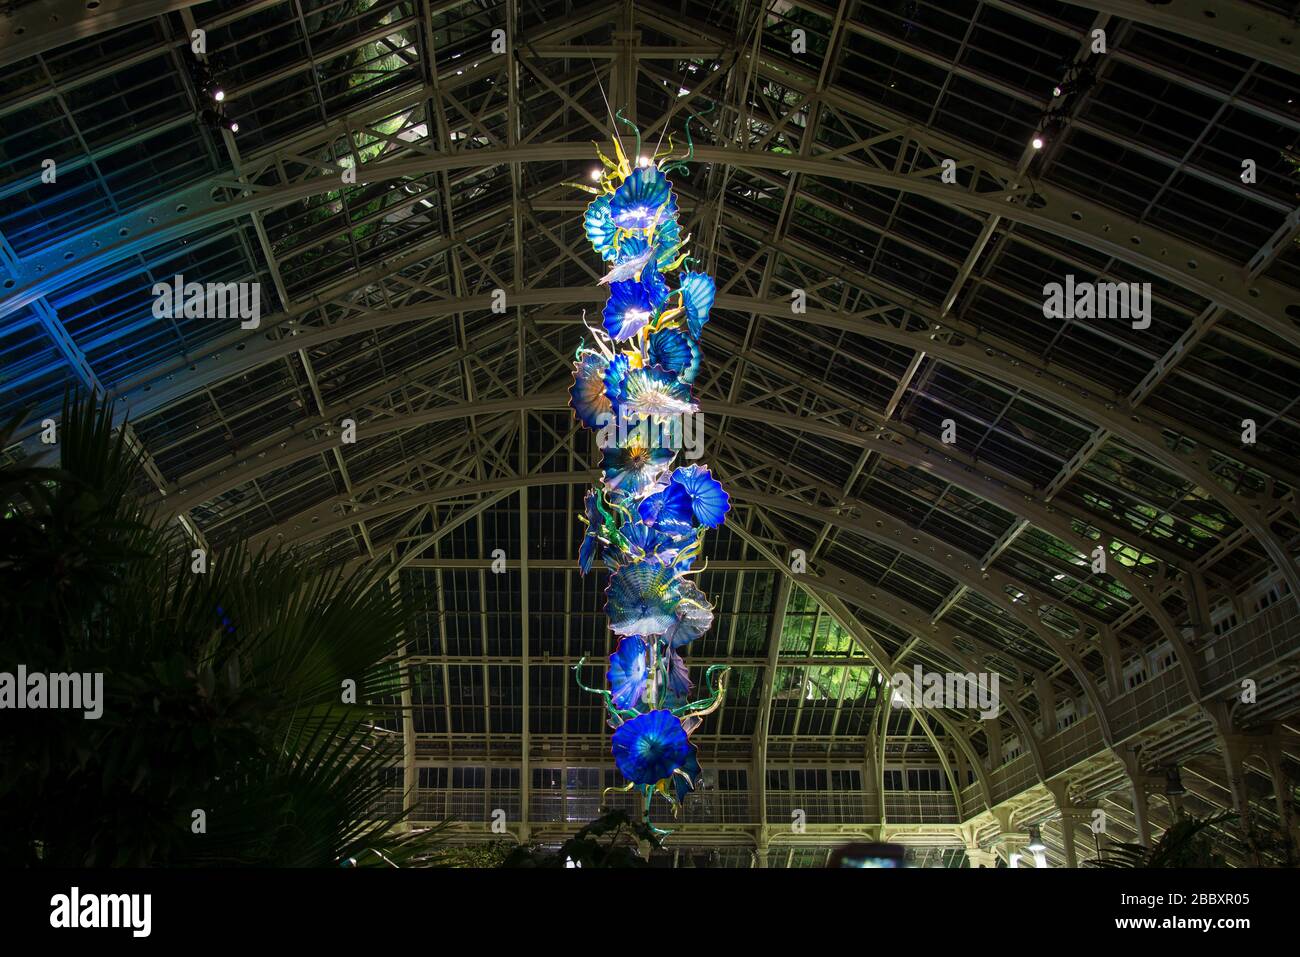 Temperate House Persians Chandelier Chihuly Nights Reflections on Nature Colourful Bright Display Event Winter 2019 at Kew Gardens, Richmond, London Stock Photo